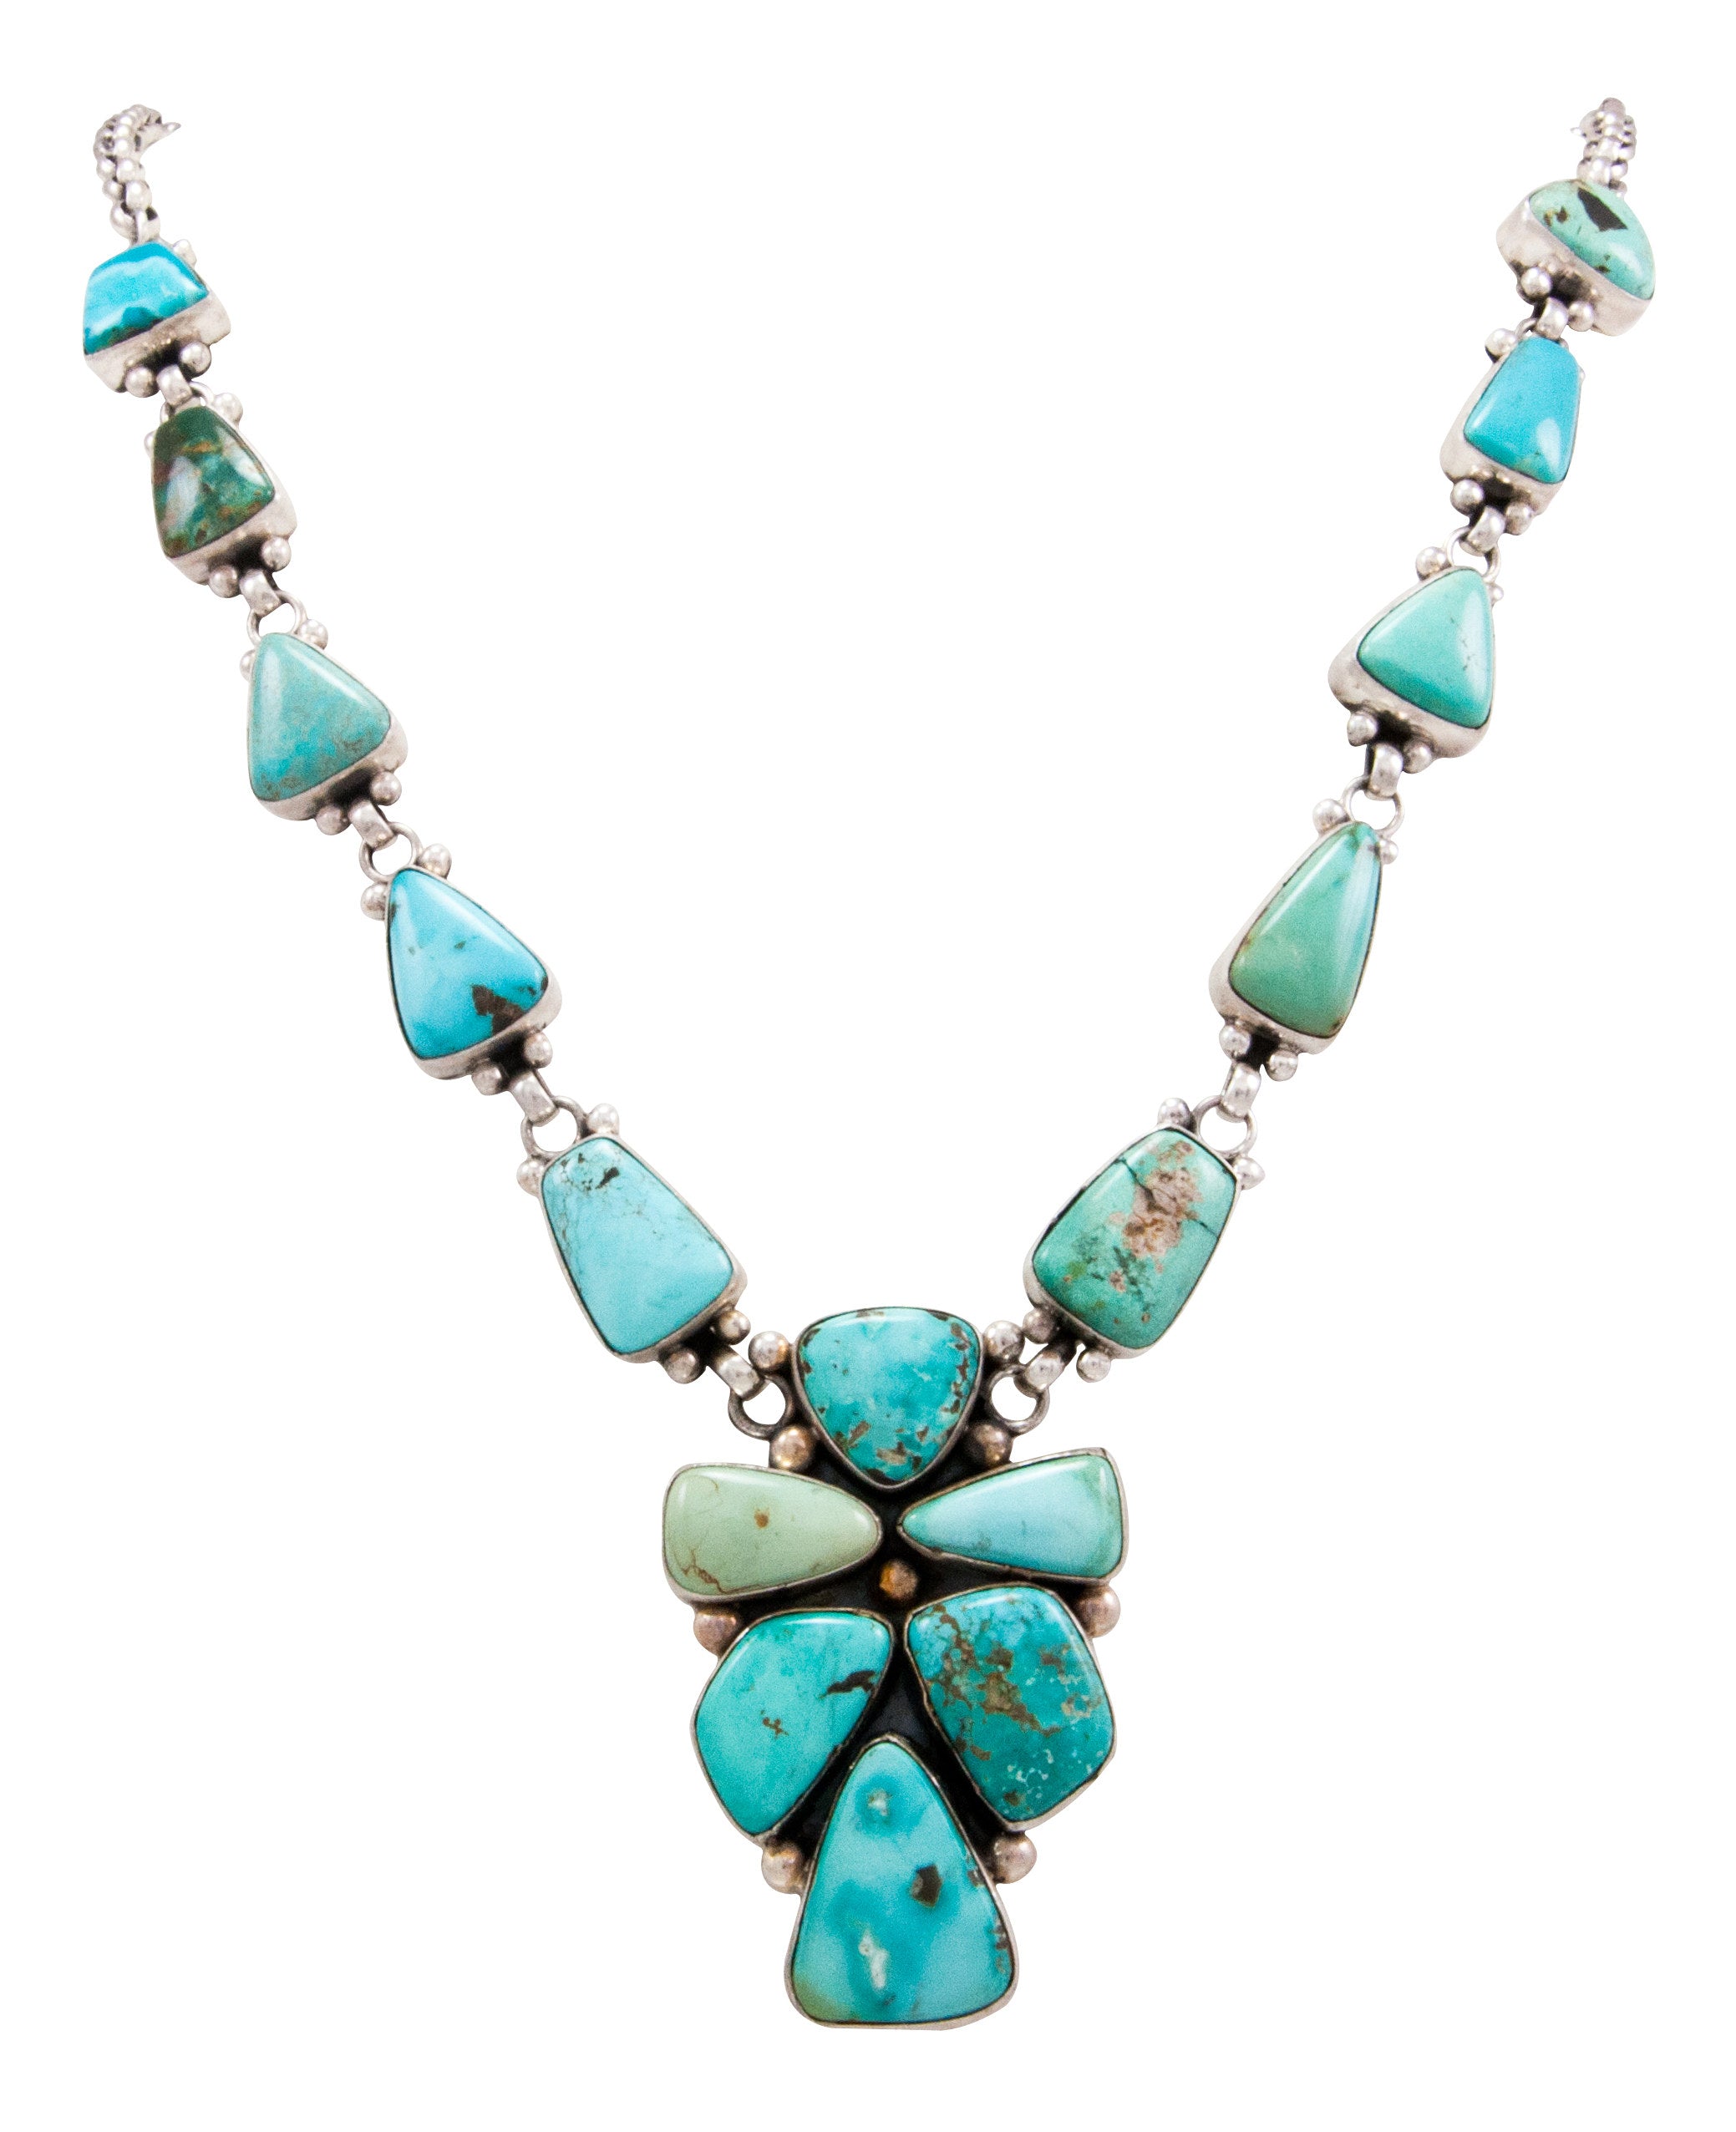 Navajo Native American Blue Moon Turquoise Necklace by Bea Tom